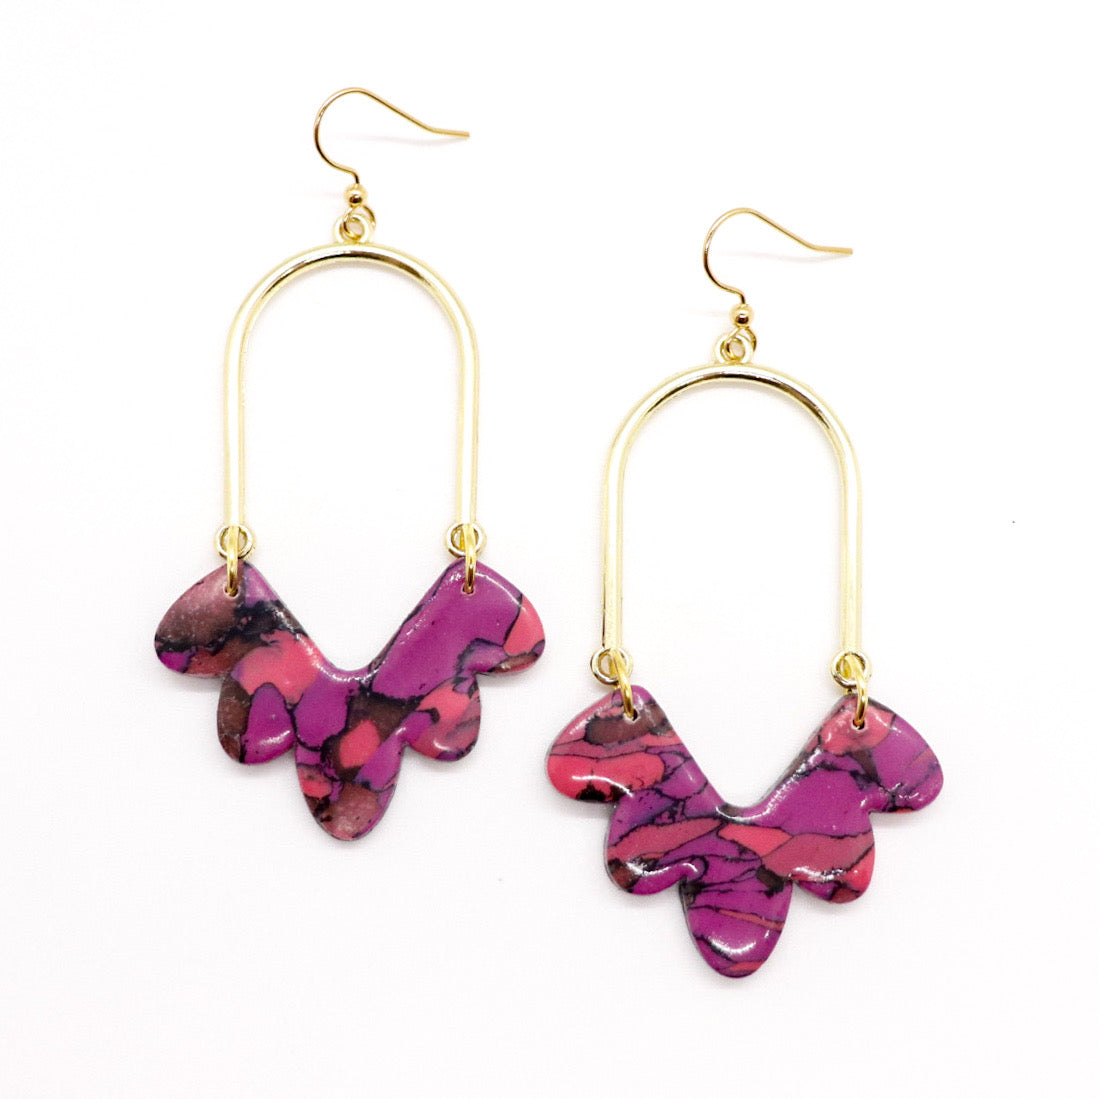 Ruffled Up Earrings in Faux Pink Turquoise